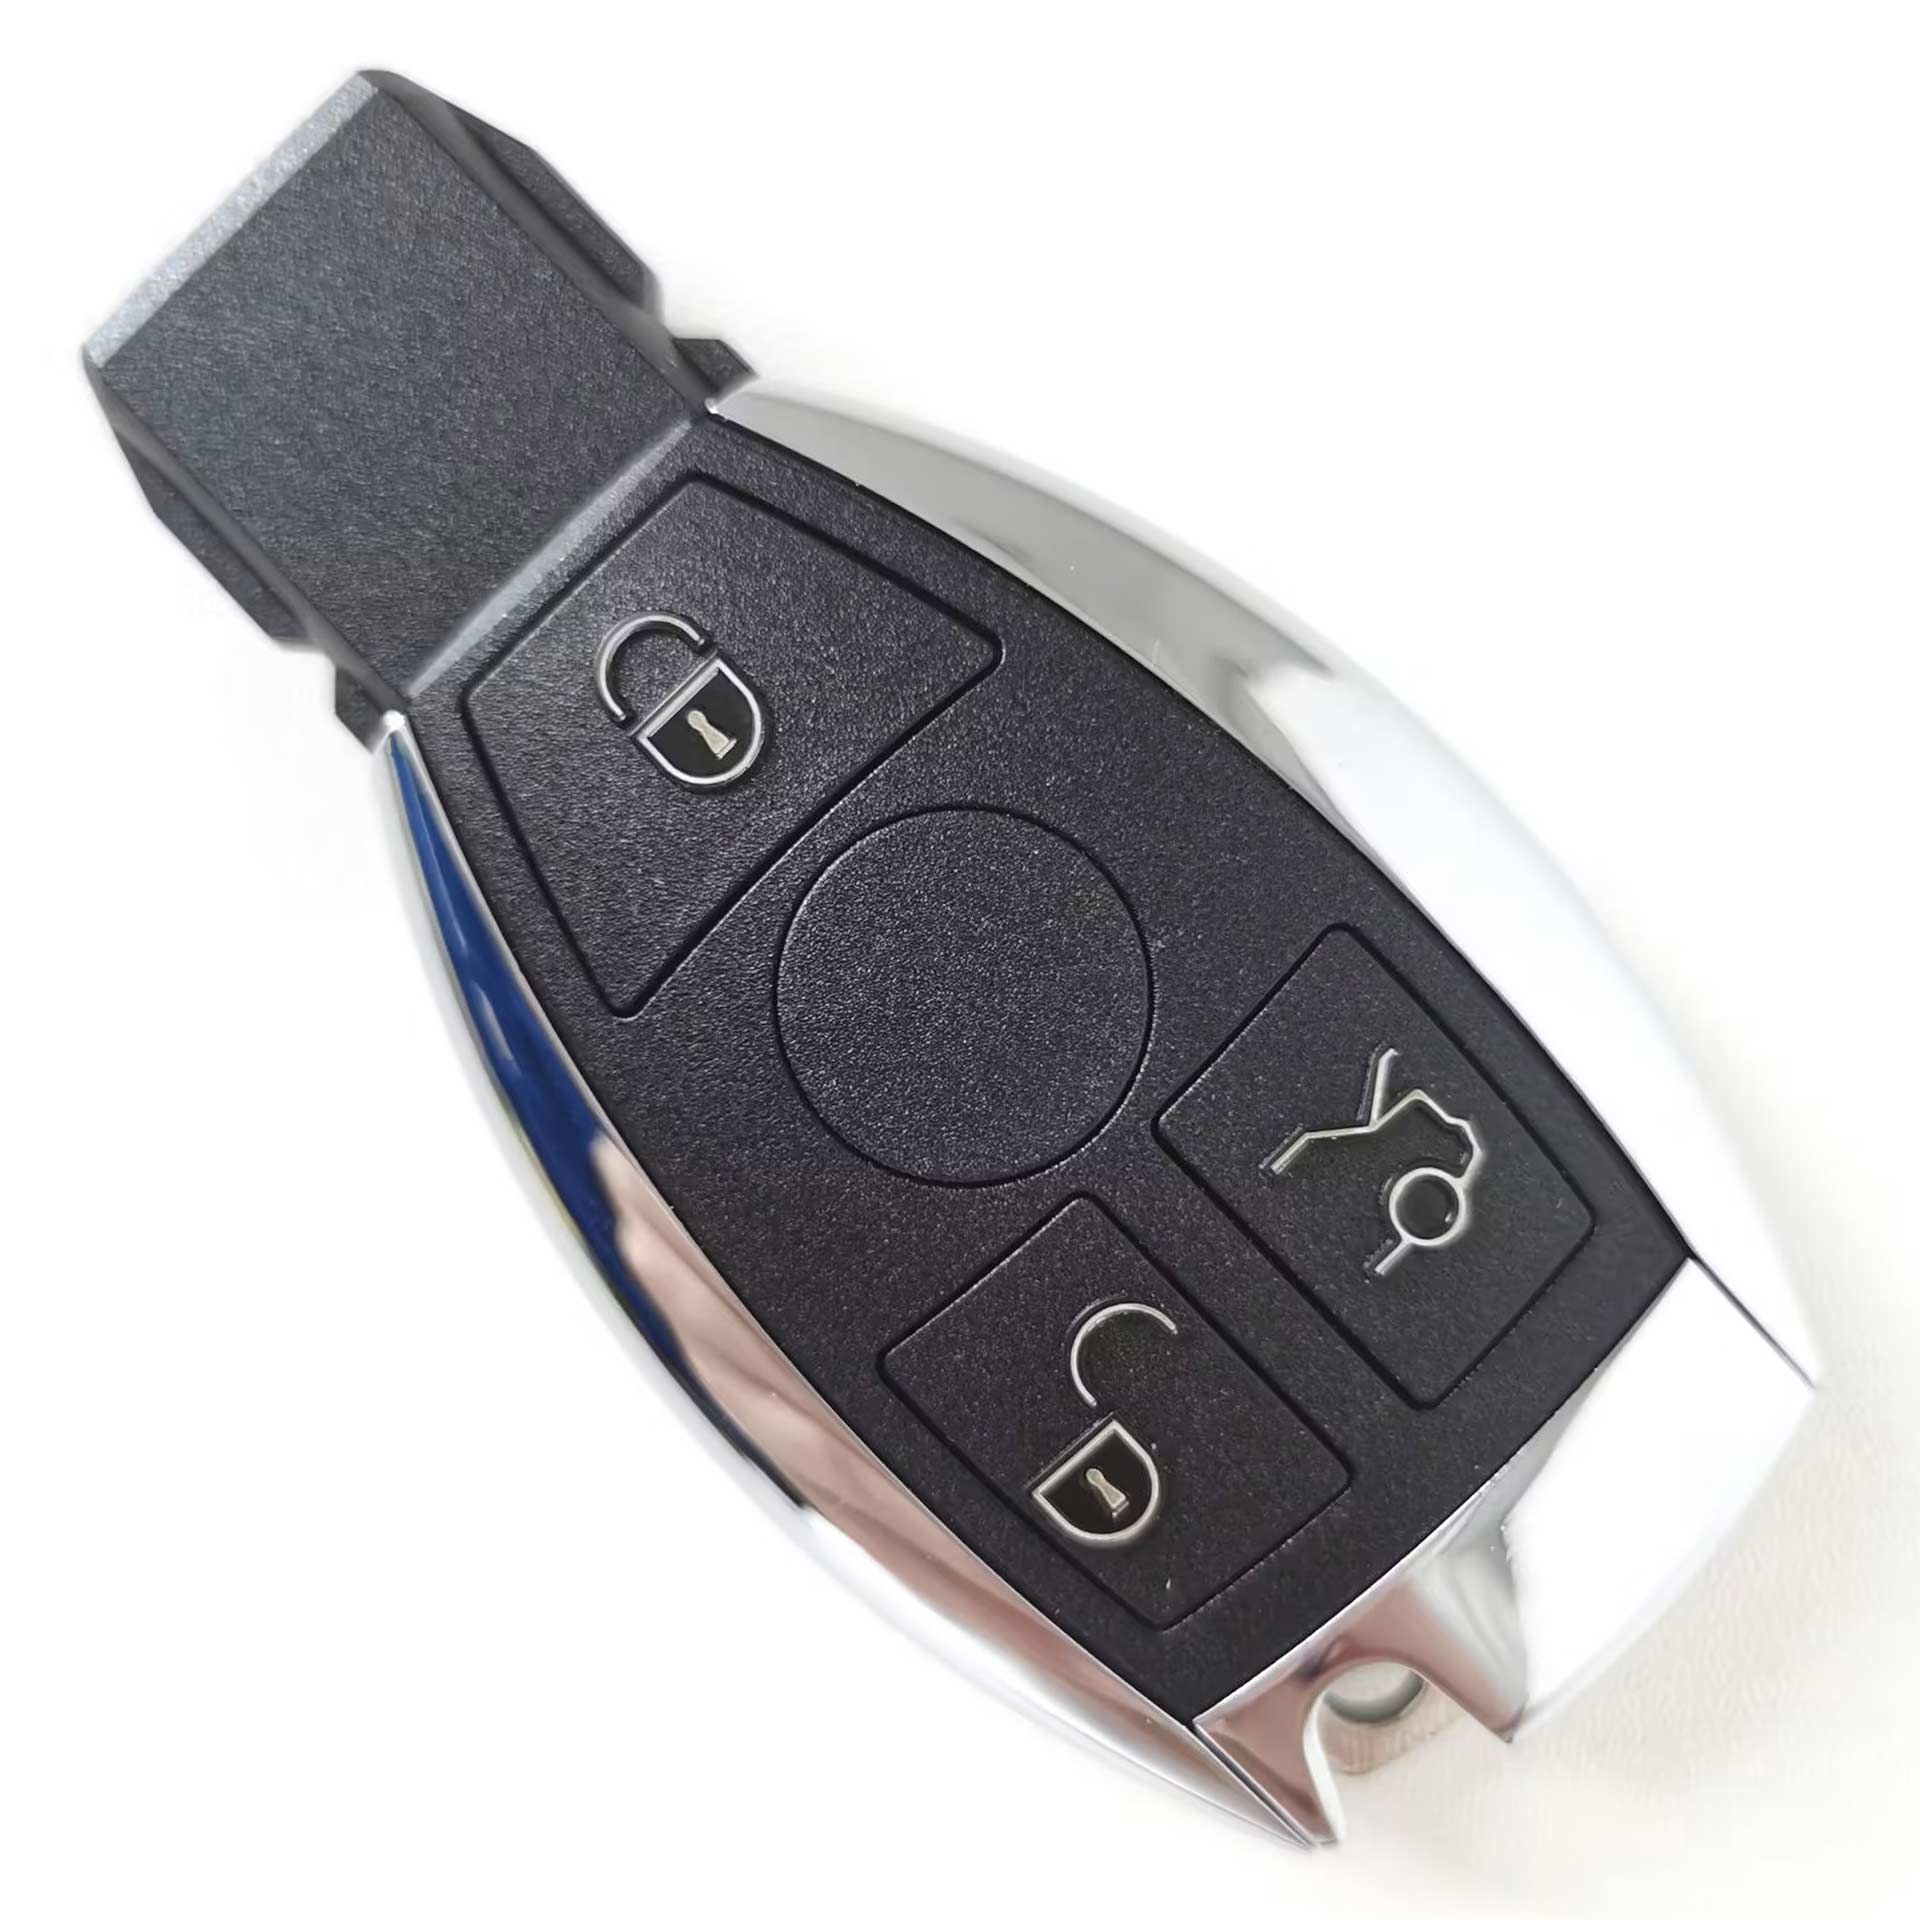 Xhorse VVDI BE BGA Remote Key for Mercedes Benz - Green PCB with Best Quality Shell